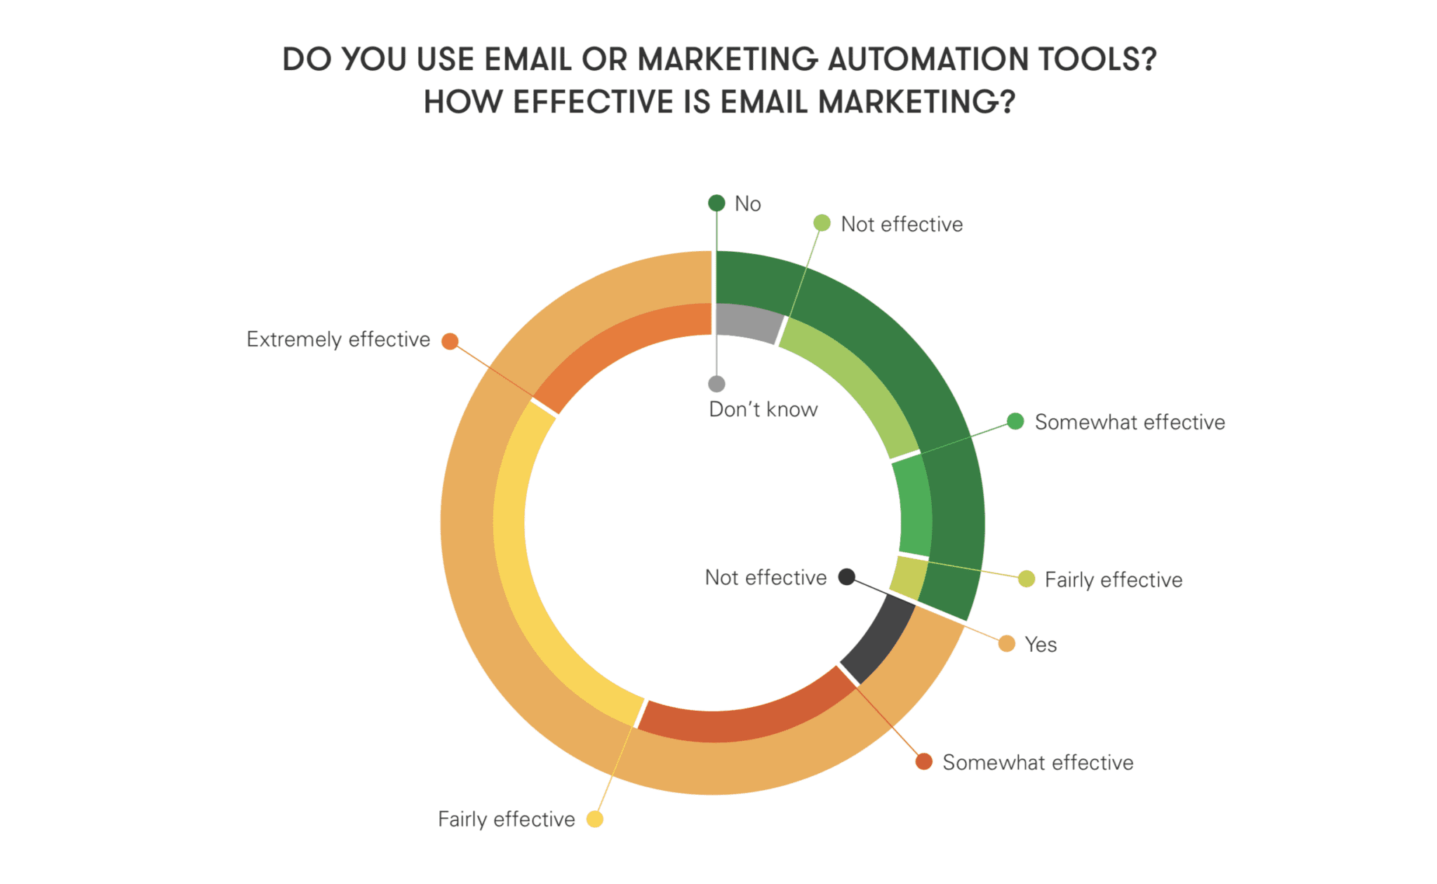 A graph showing statistics on the effectiveness of email marketing to use for event marketing